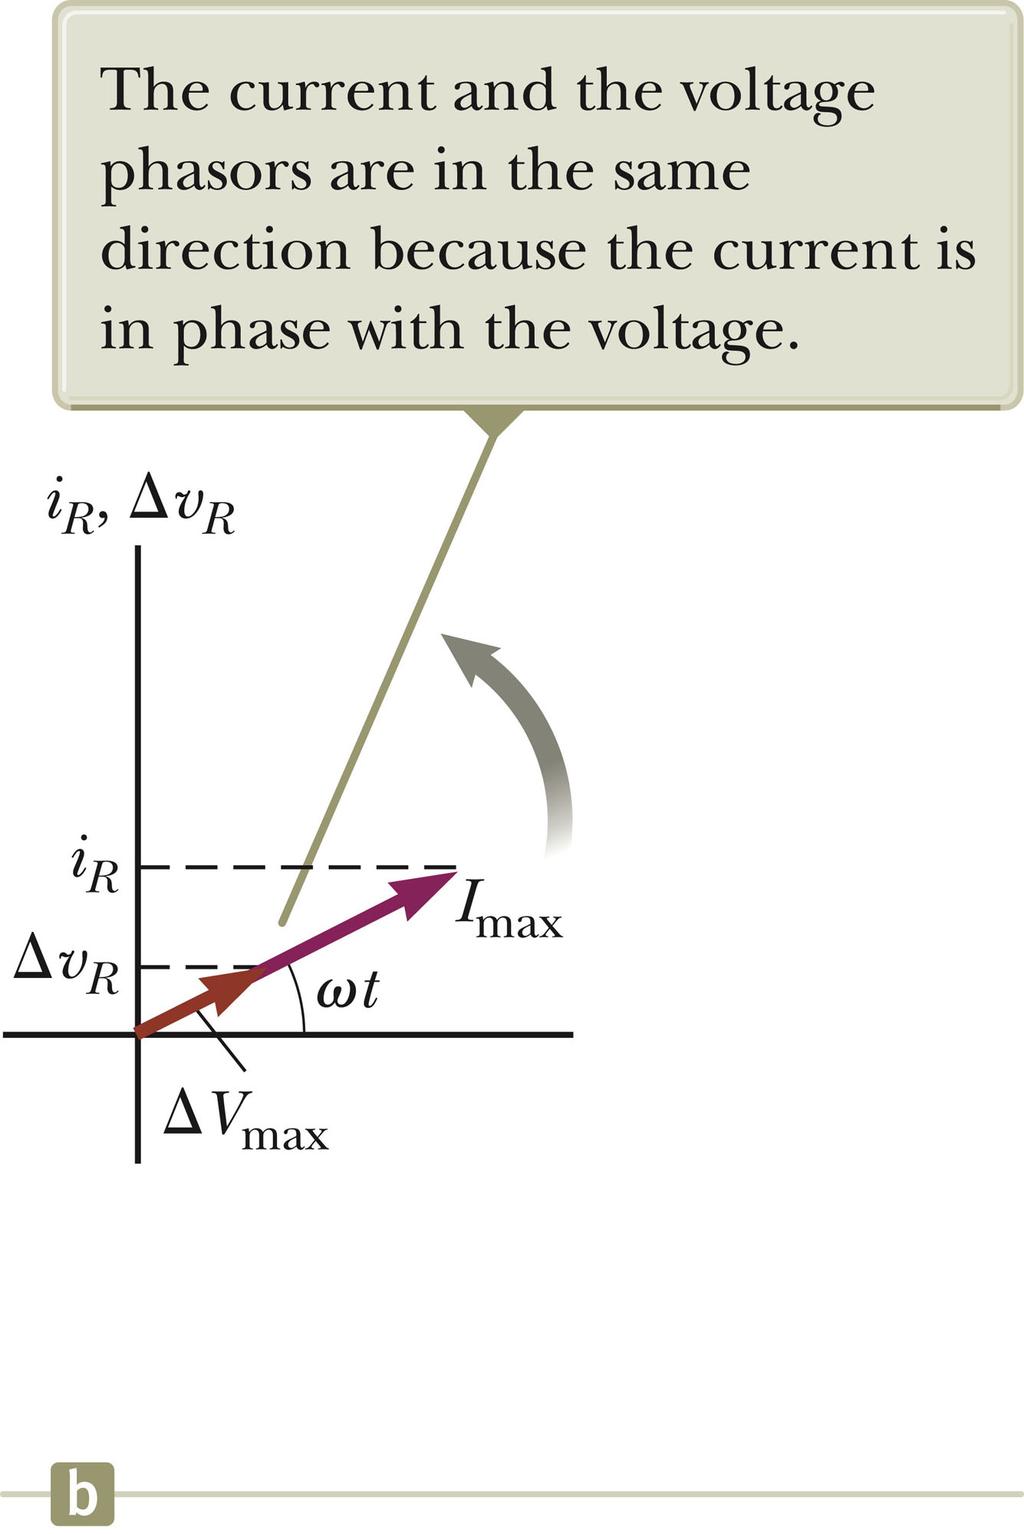 Phasor Diagram To simplify the analysis of AC circuits, a phasor diagram can be used. A phasor is a vector whose length is proportional to the maximum value of the variable it represents.